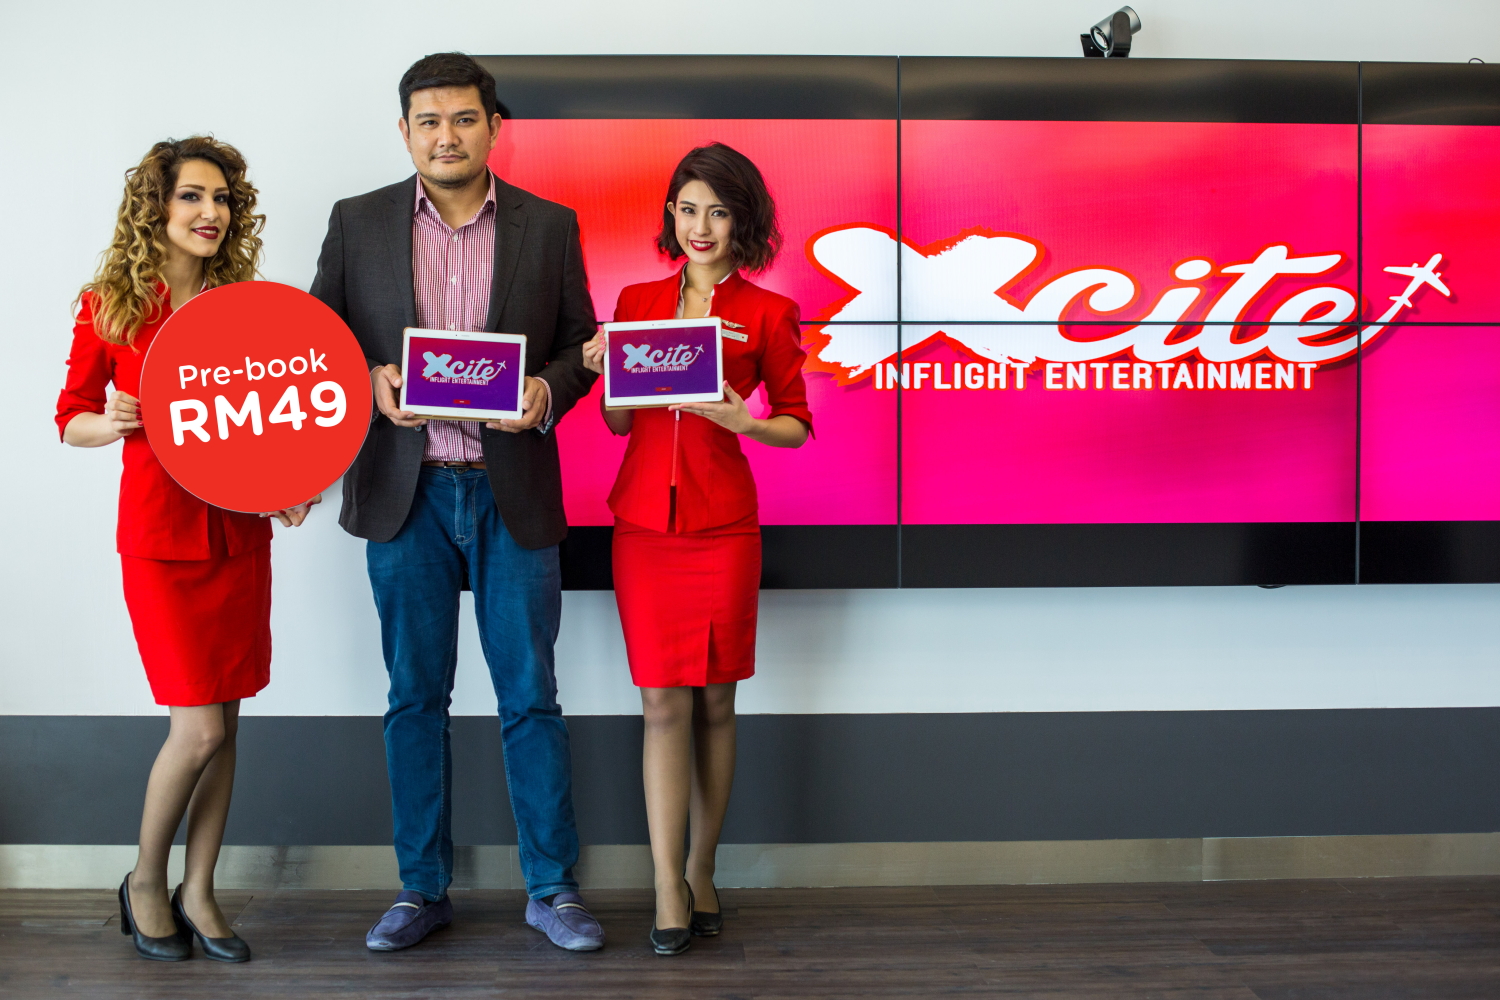 Benyamin Ismail, CEO of AirAsia X Berhad, with a couple of beautiful AirAsia X staff showing off the new IFE system